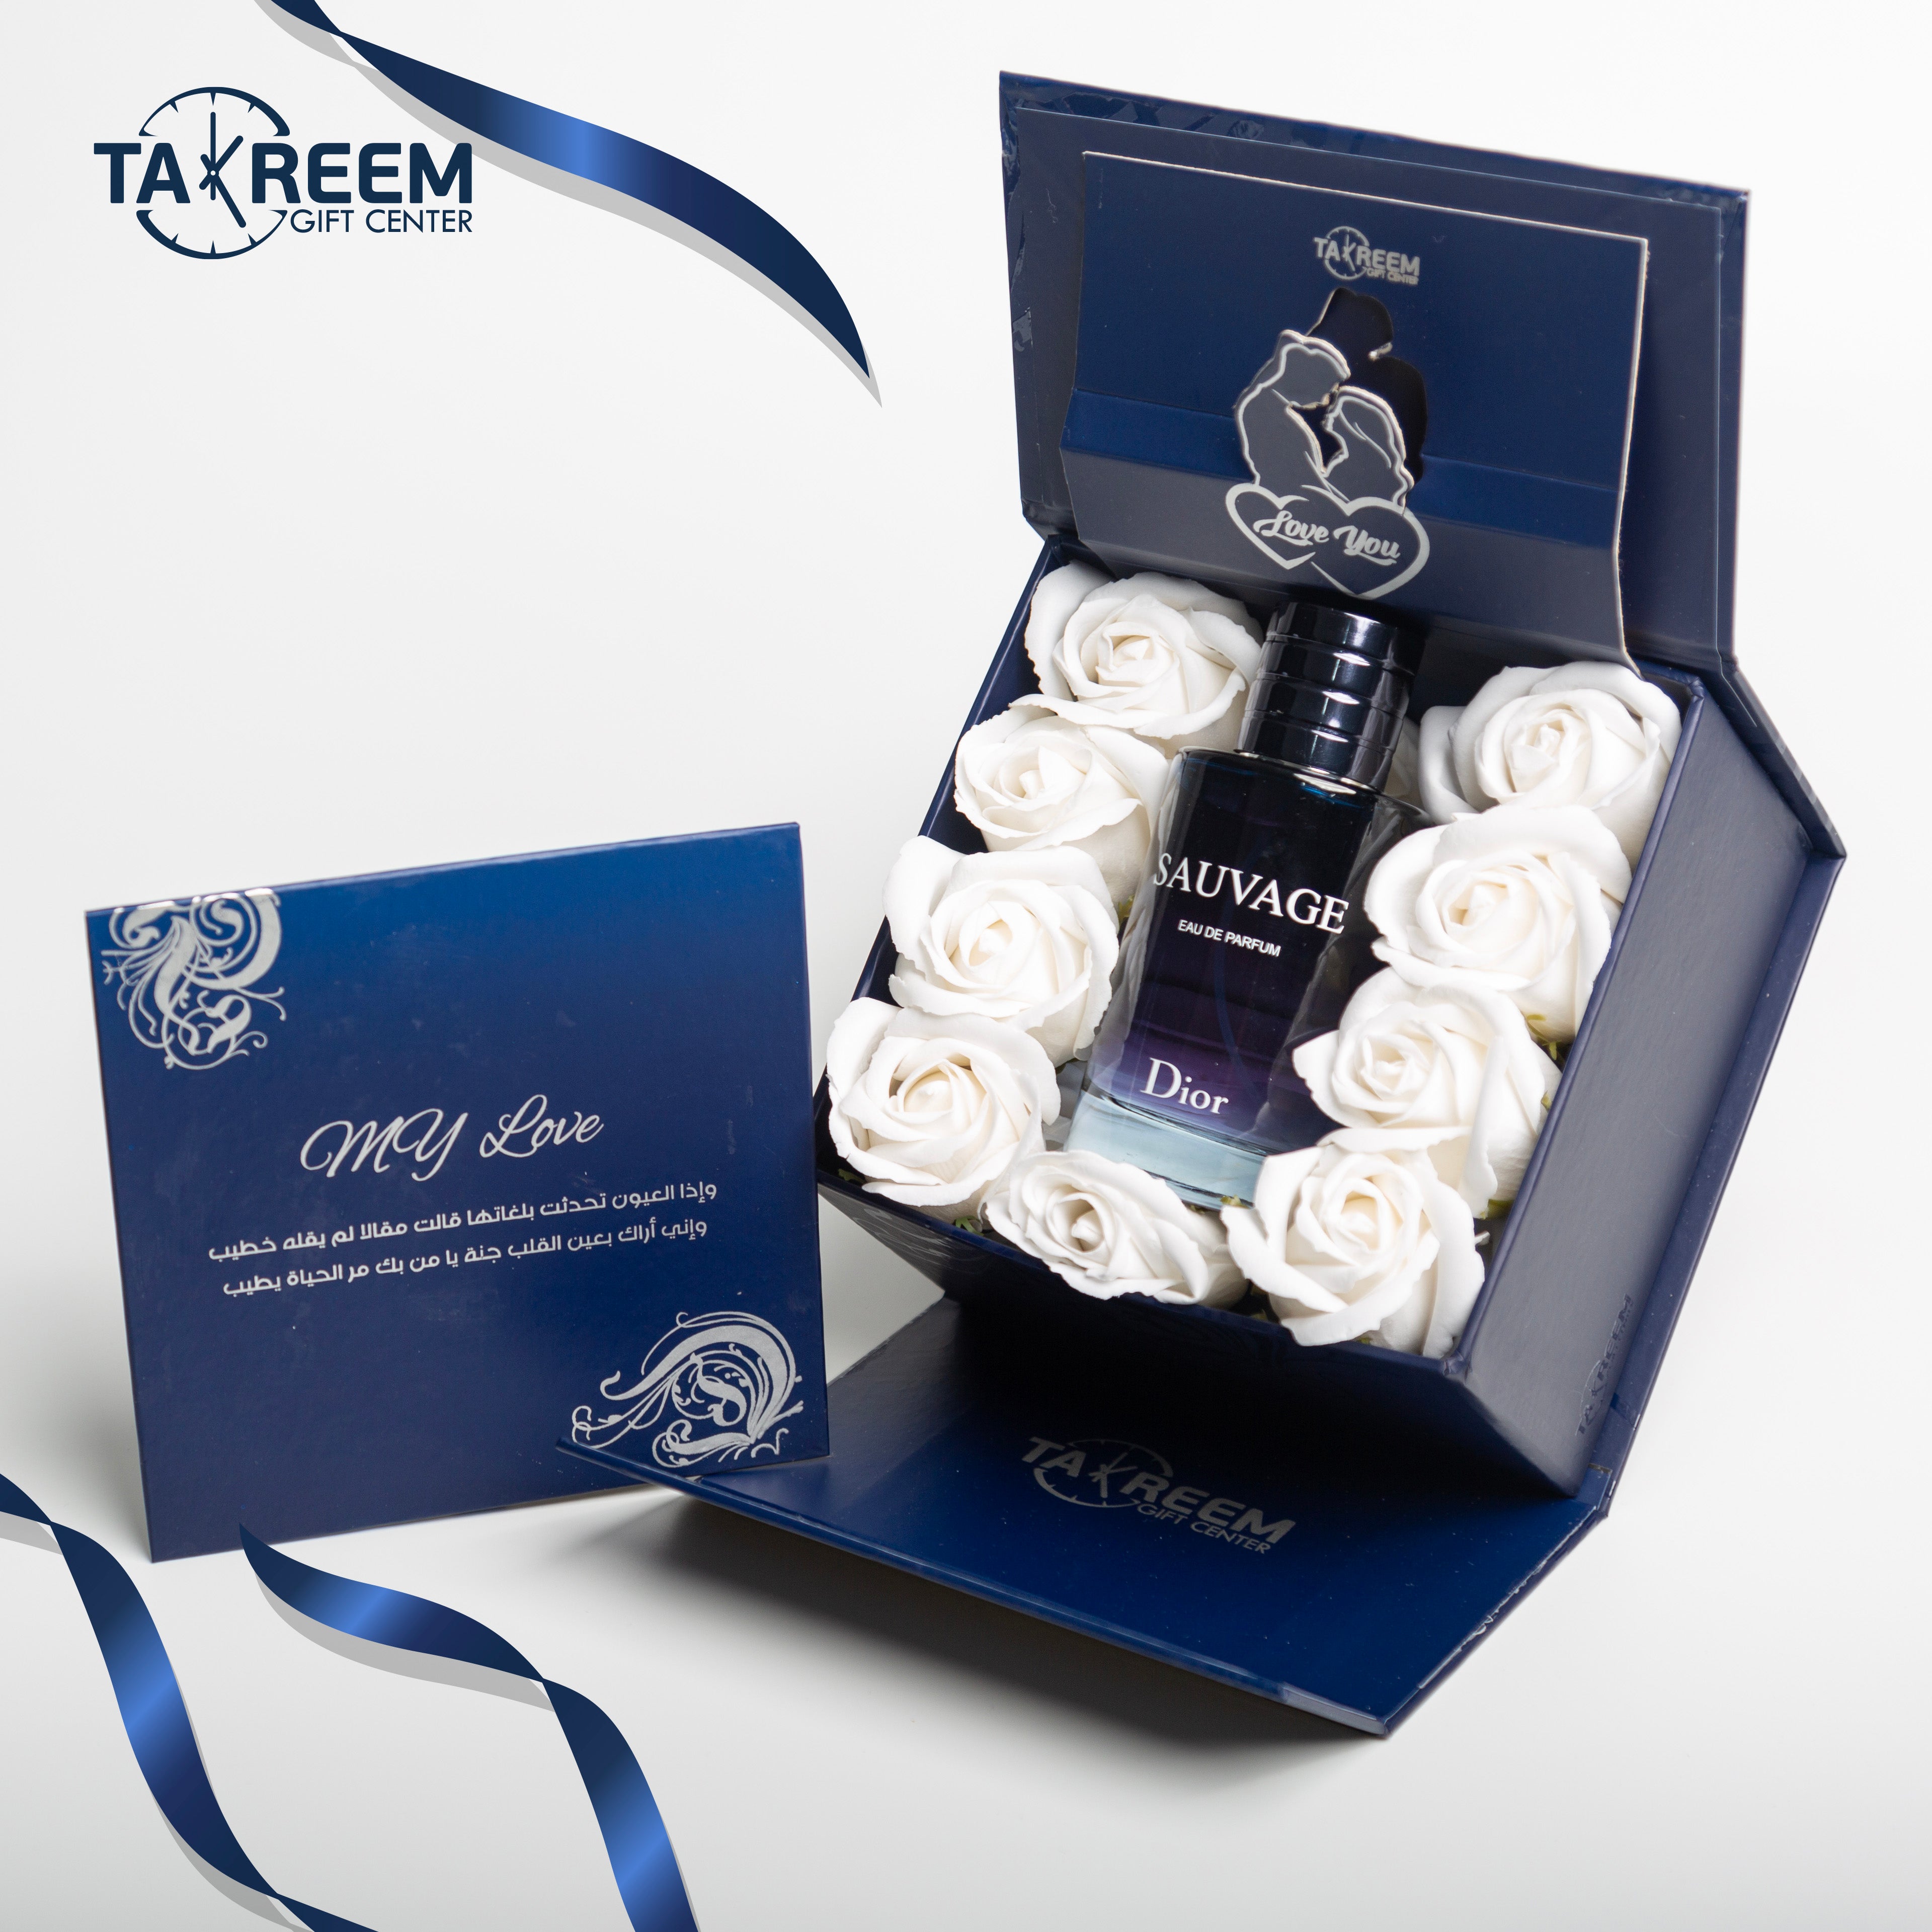 Small Smile3 Gift Boxes  By Takreem Gifts Center